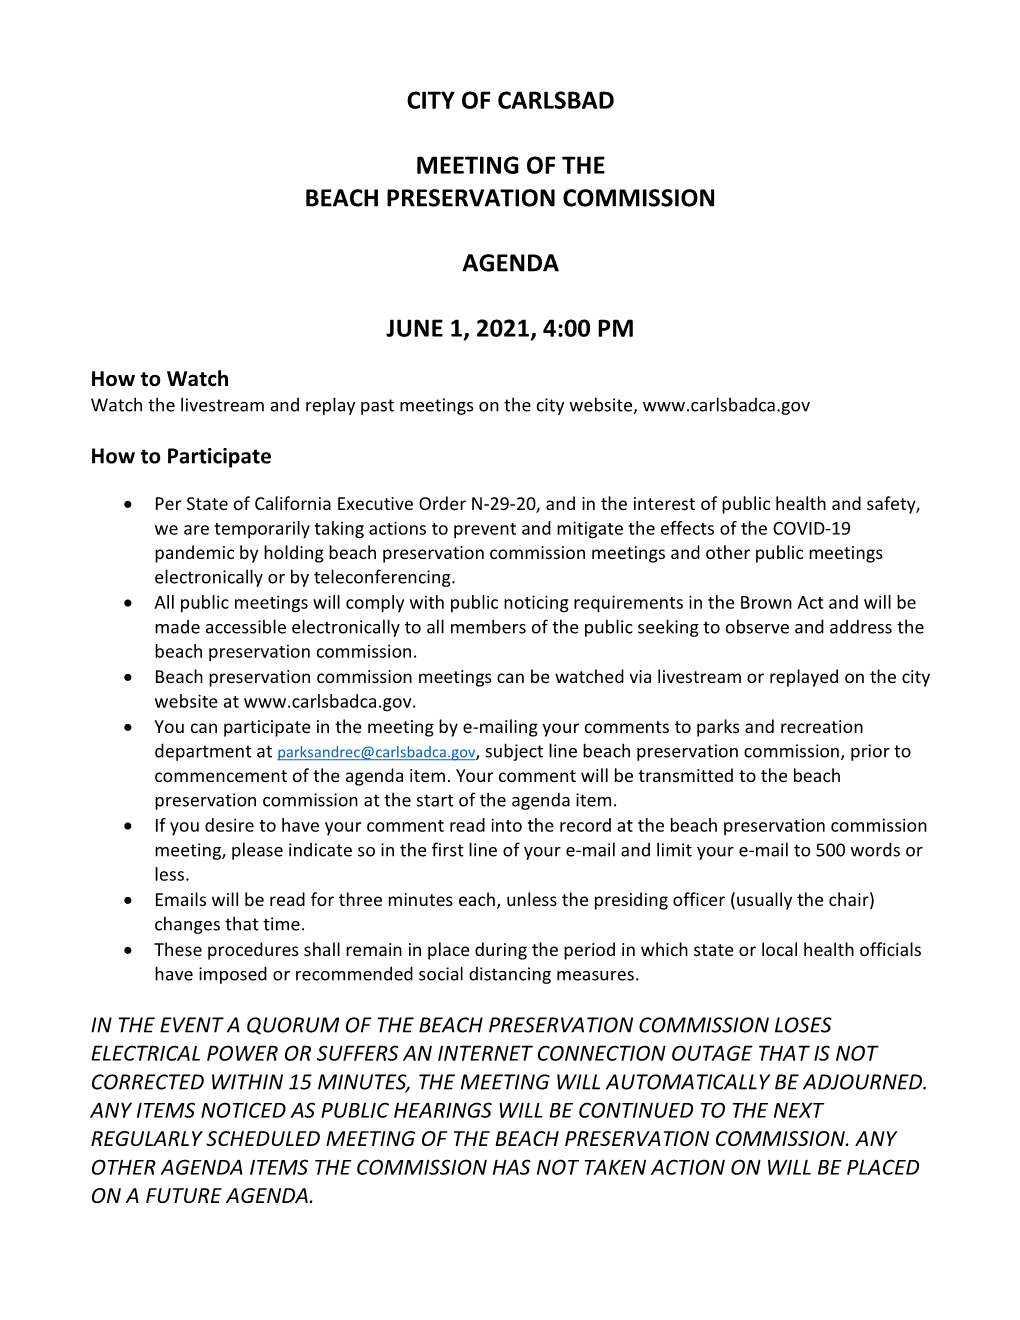 City of Carlsbad Meeting of the Beach Preservation